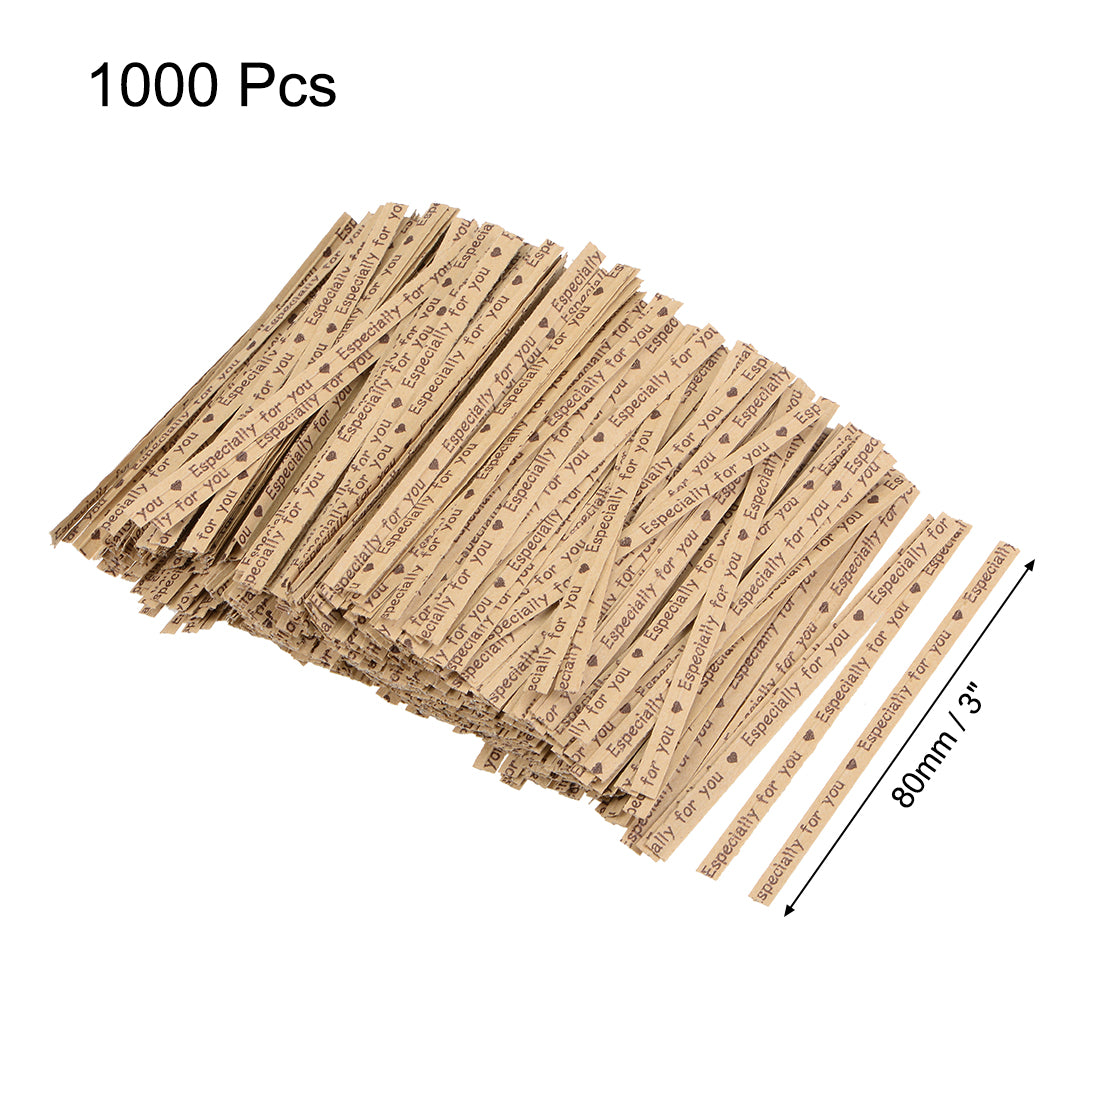 uxcell Uxcell Long Strong Twist Ties 3.15 Inch Quality  Closure for Tying Gift Bags Art Craft Ties Manage Cords Coffee 1000pcs